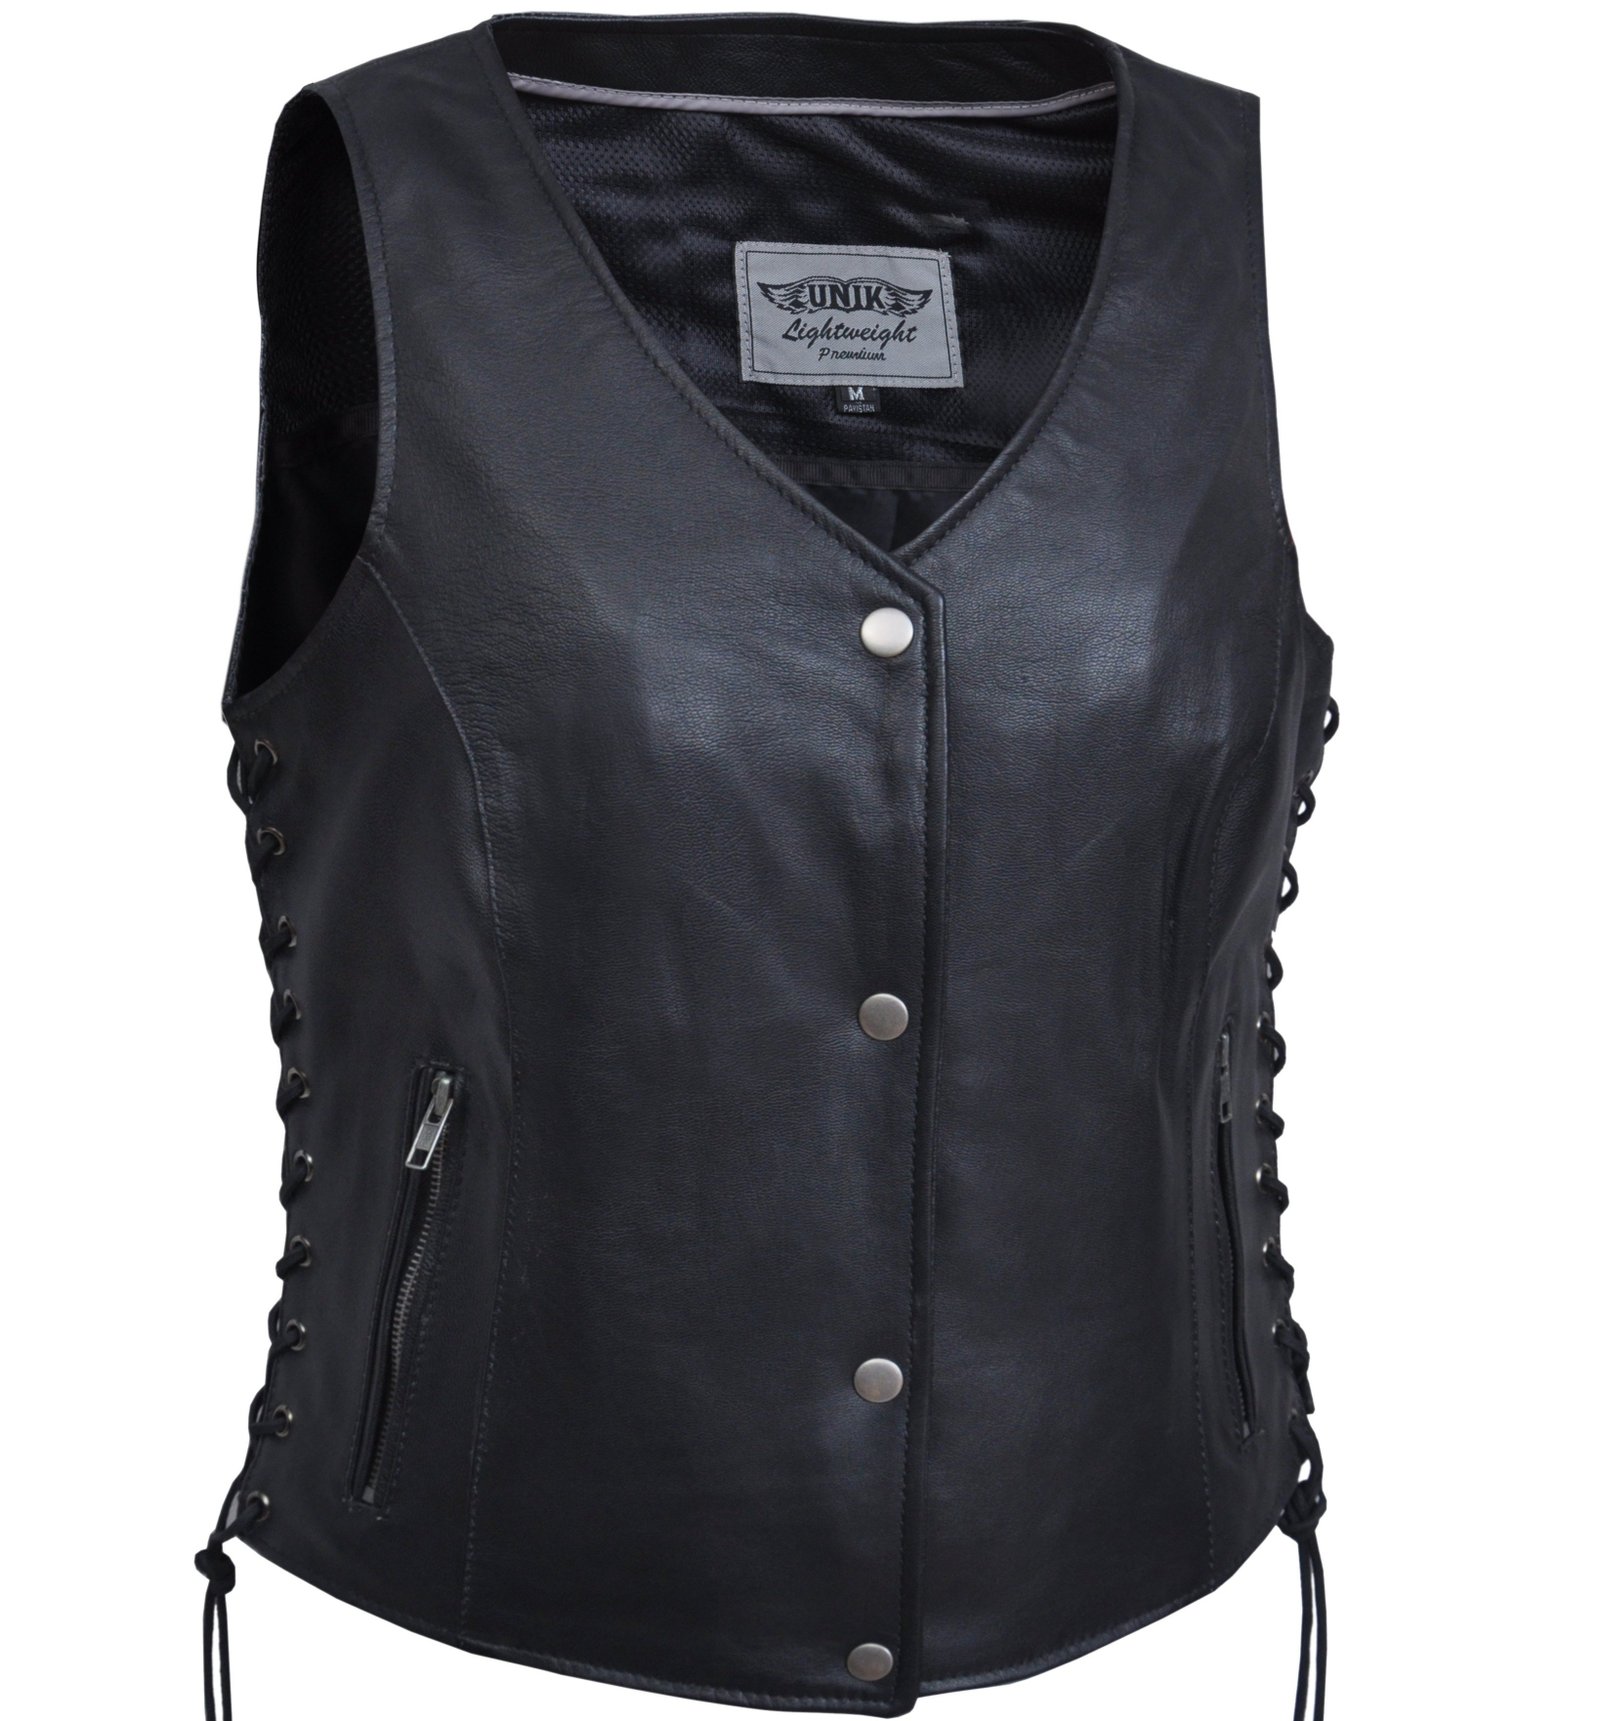 Leather Motorcycle Vest - Women's - Up To Size 8X - Lightweight - 2681-NG-UN